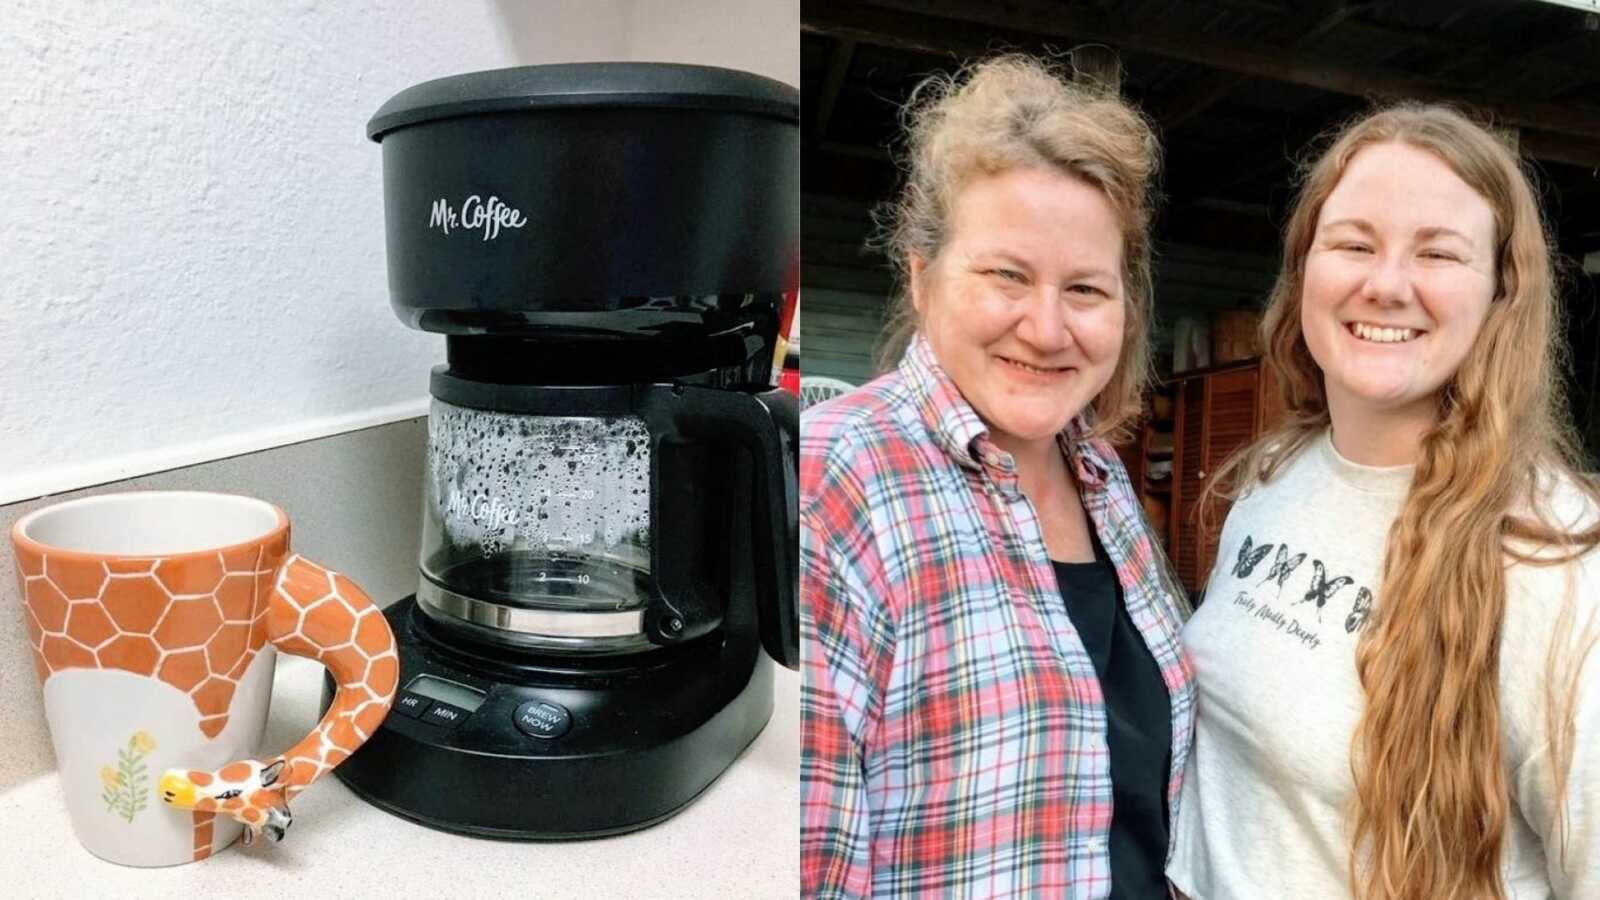 Motherless daughter shares photo of coffee pot and photo with her late mother